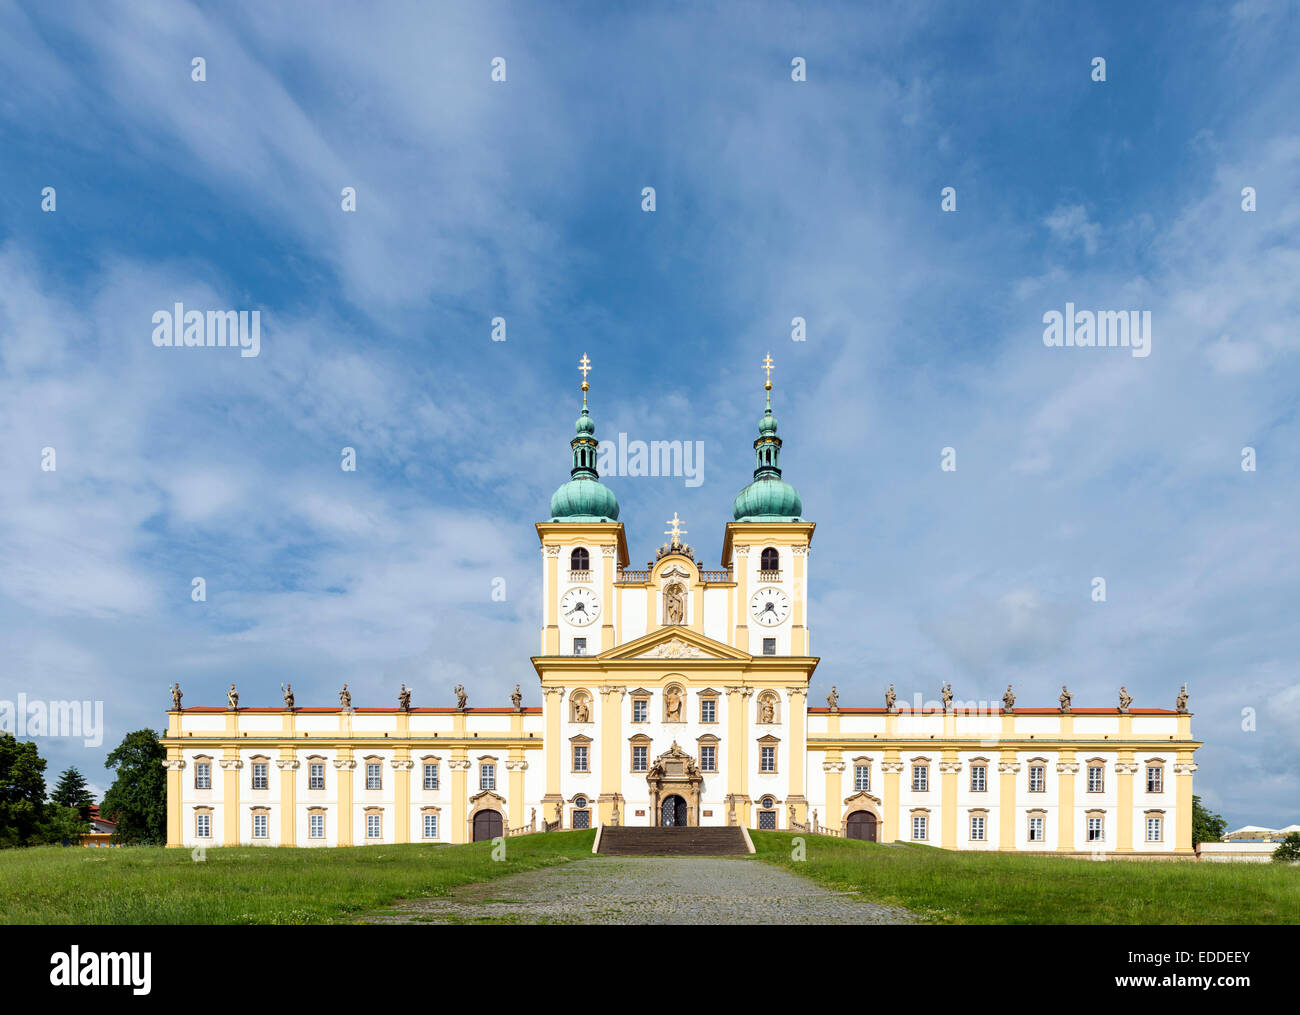 Premonstrate Monastery with the Basilica of the Annunciation, Svaty Kopecek or Holy Hill, Olomouc, Czech Republic Stock Photo